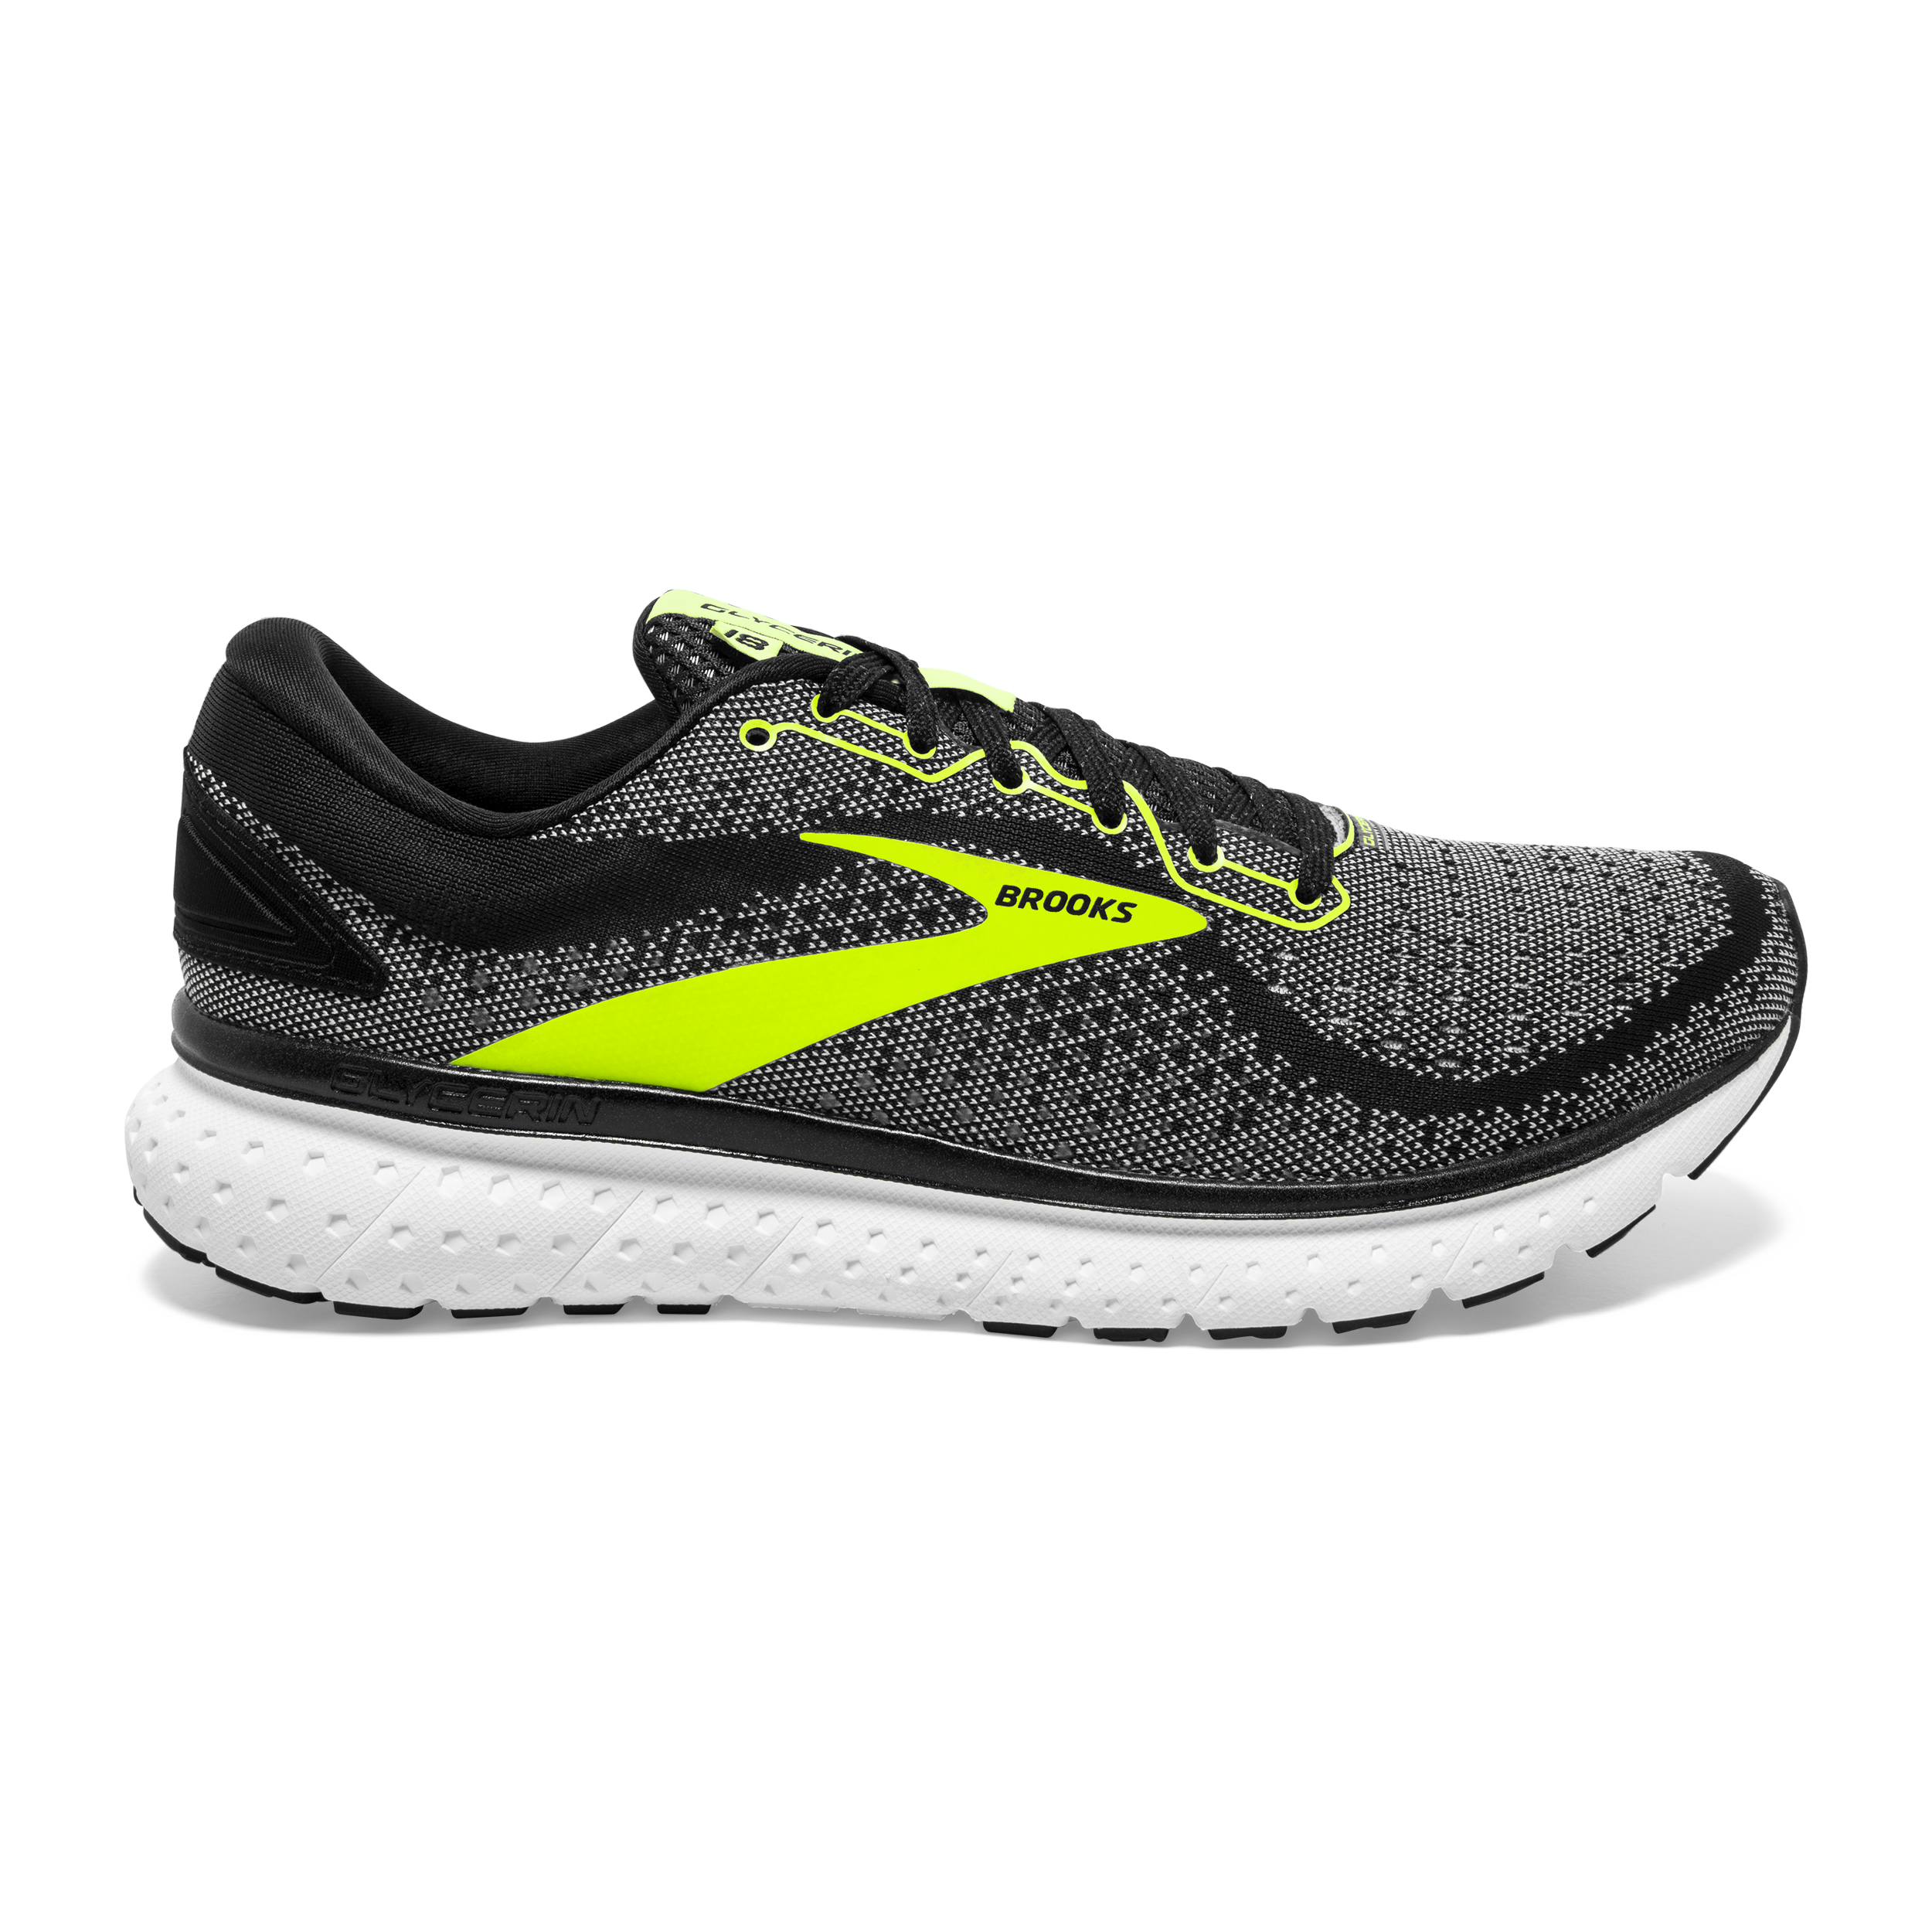 024 Brooks Glycerin 12 Mens Runner + Free Aus Delivery D